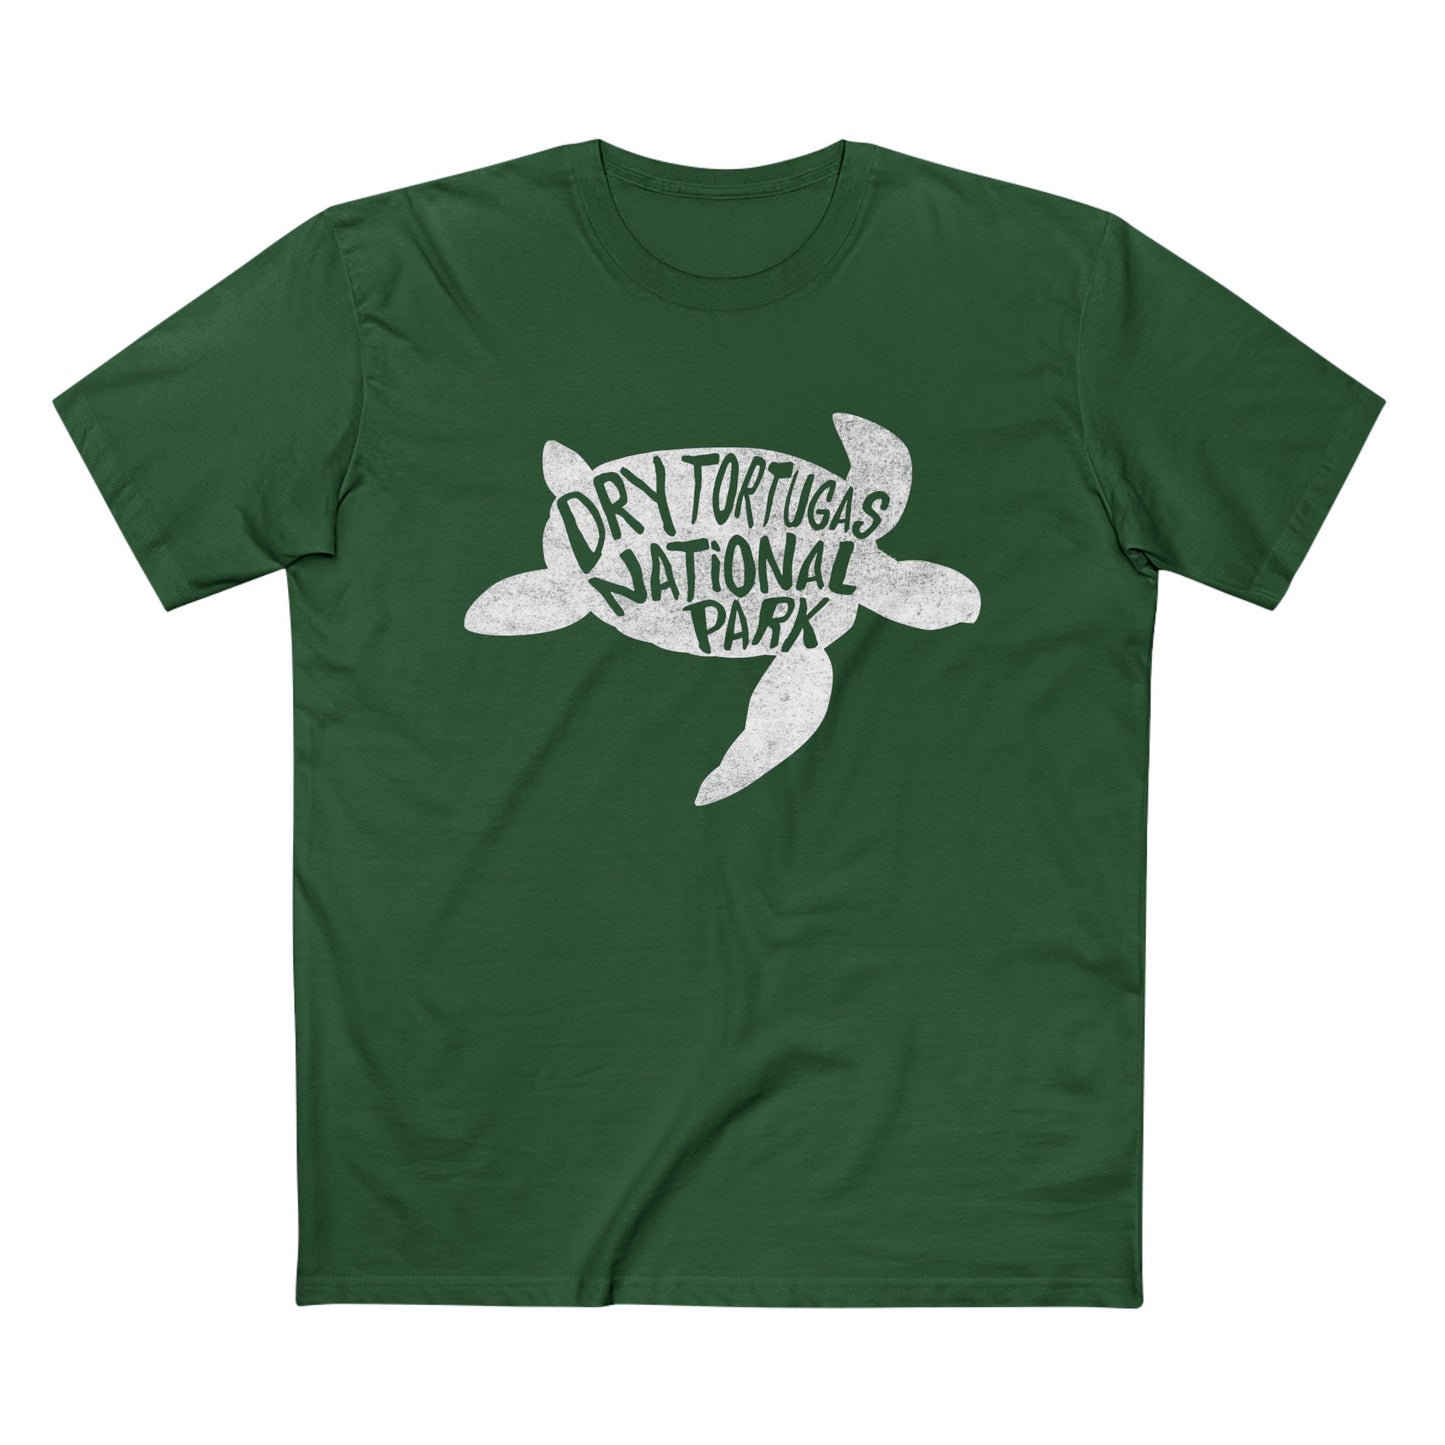 Dry Tortugas National Park T-Shirt - Turtle